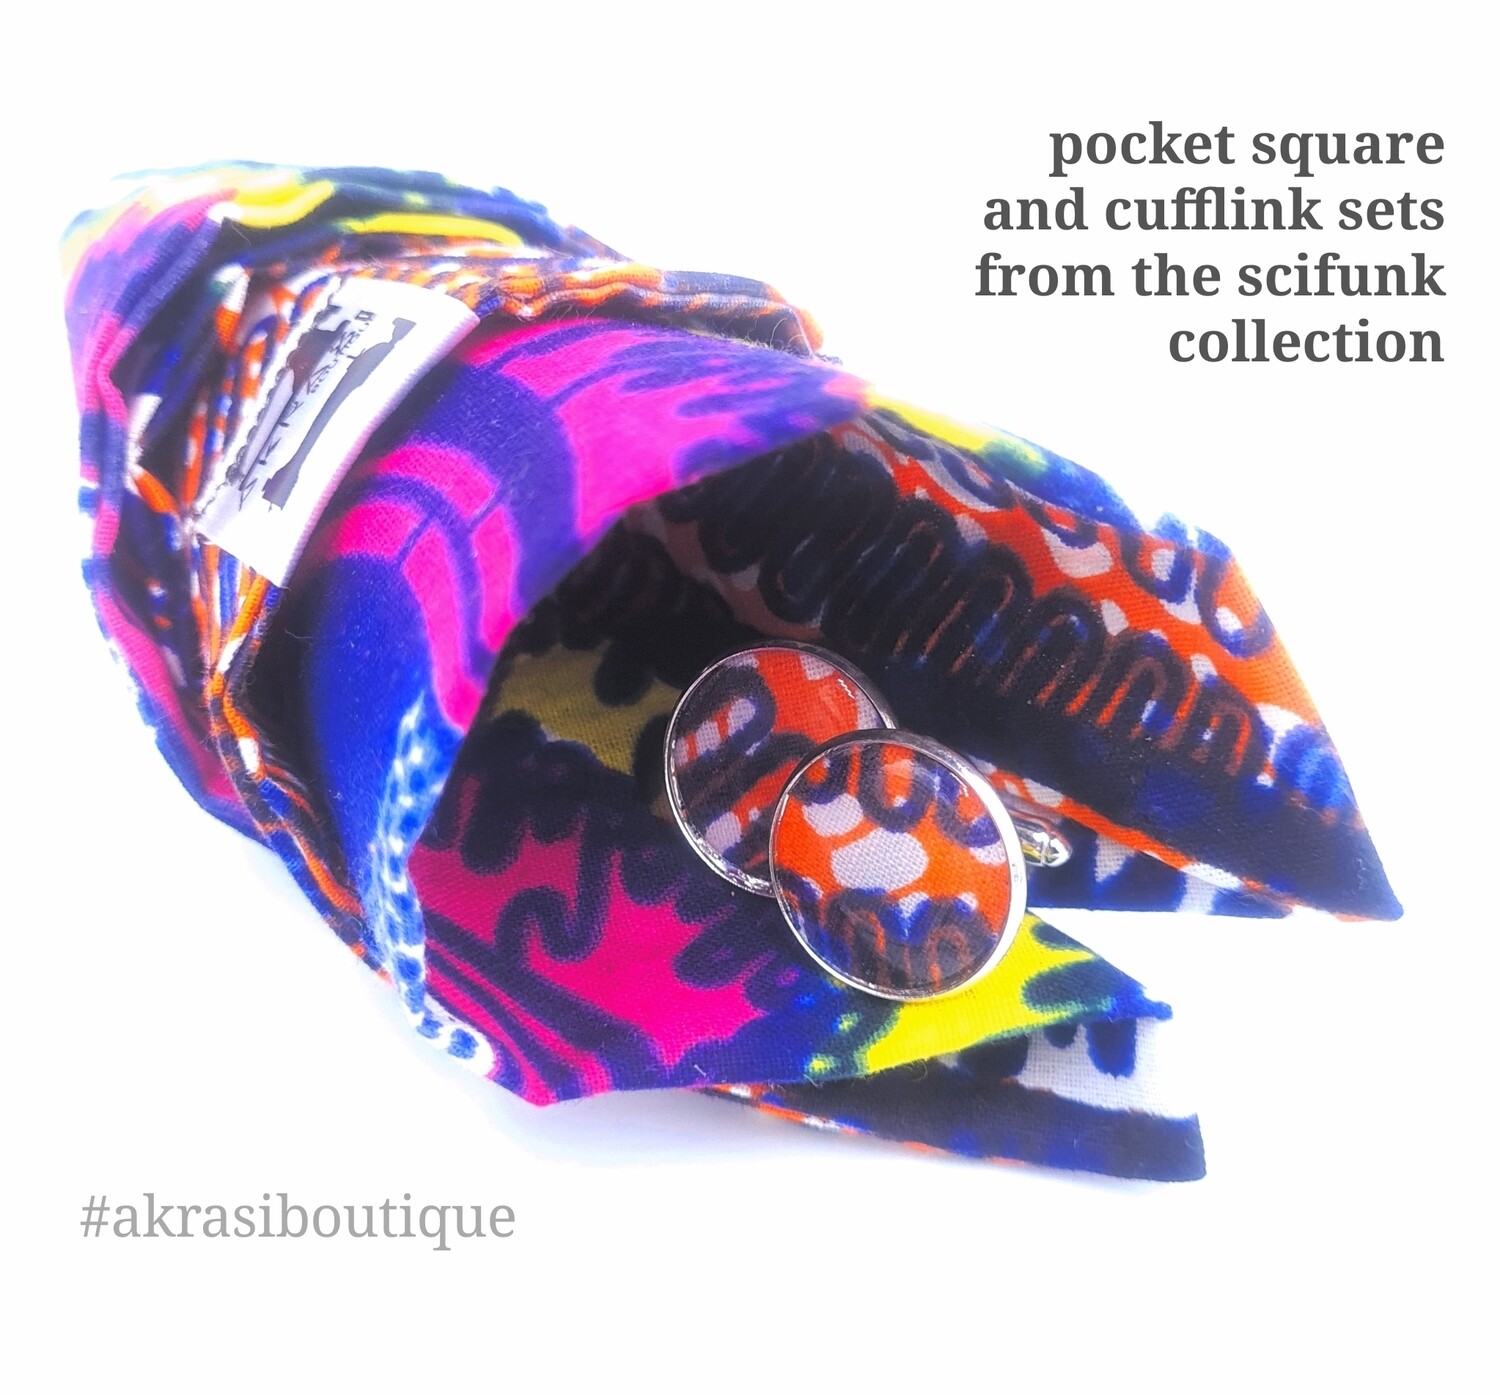 Scifunk African wax print pocket square with cufflinks | men's accessories | Ankara pocket square | African cufflinks